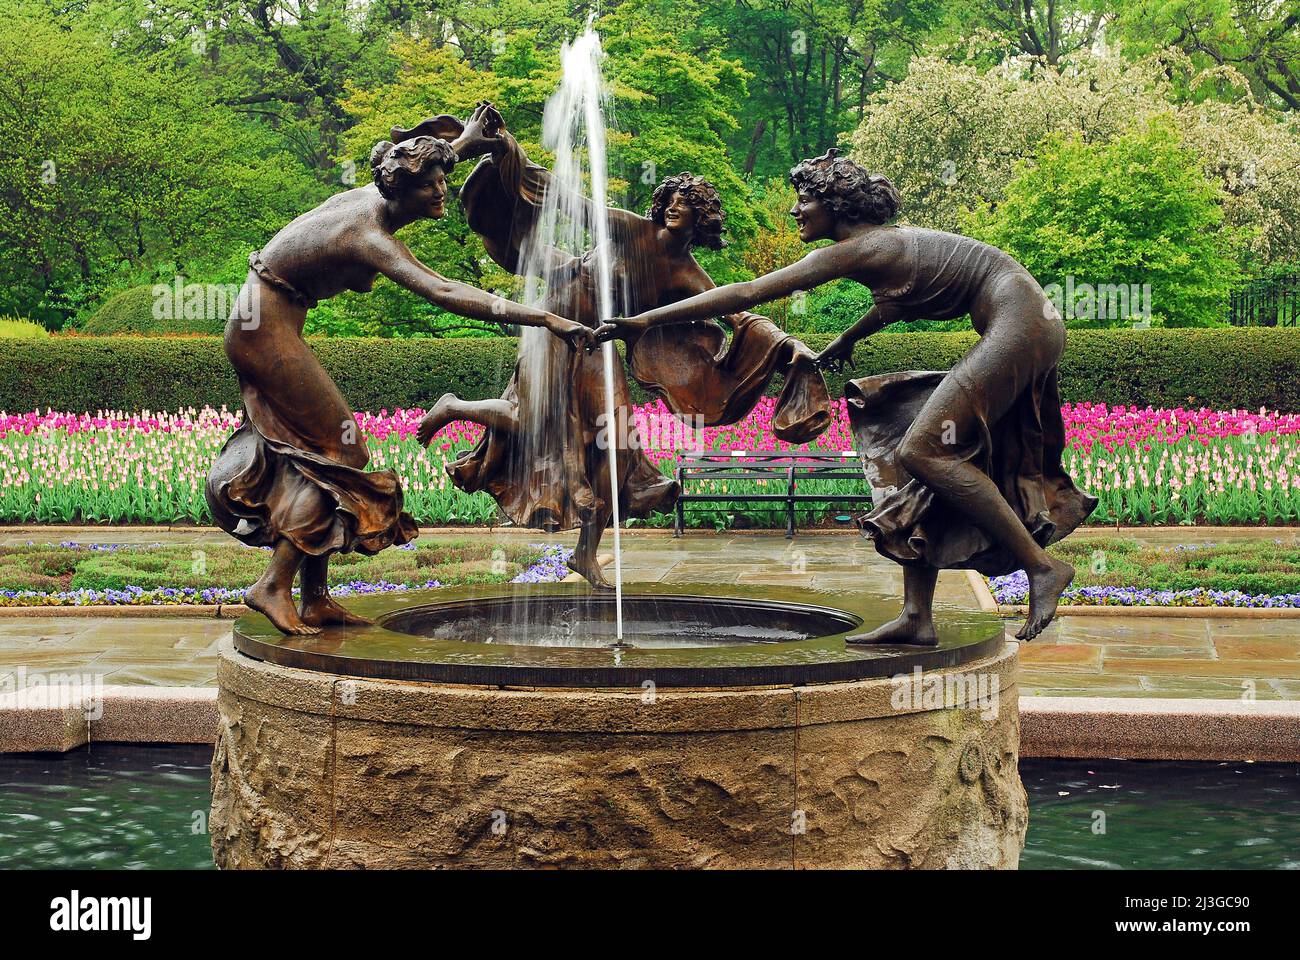 The sculpture of three dancing nymphs circling a water fountain highlights the Conservatory Gardens of New York's Central Park in spring Stock Photo